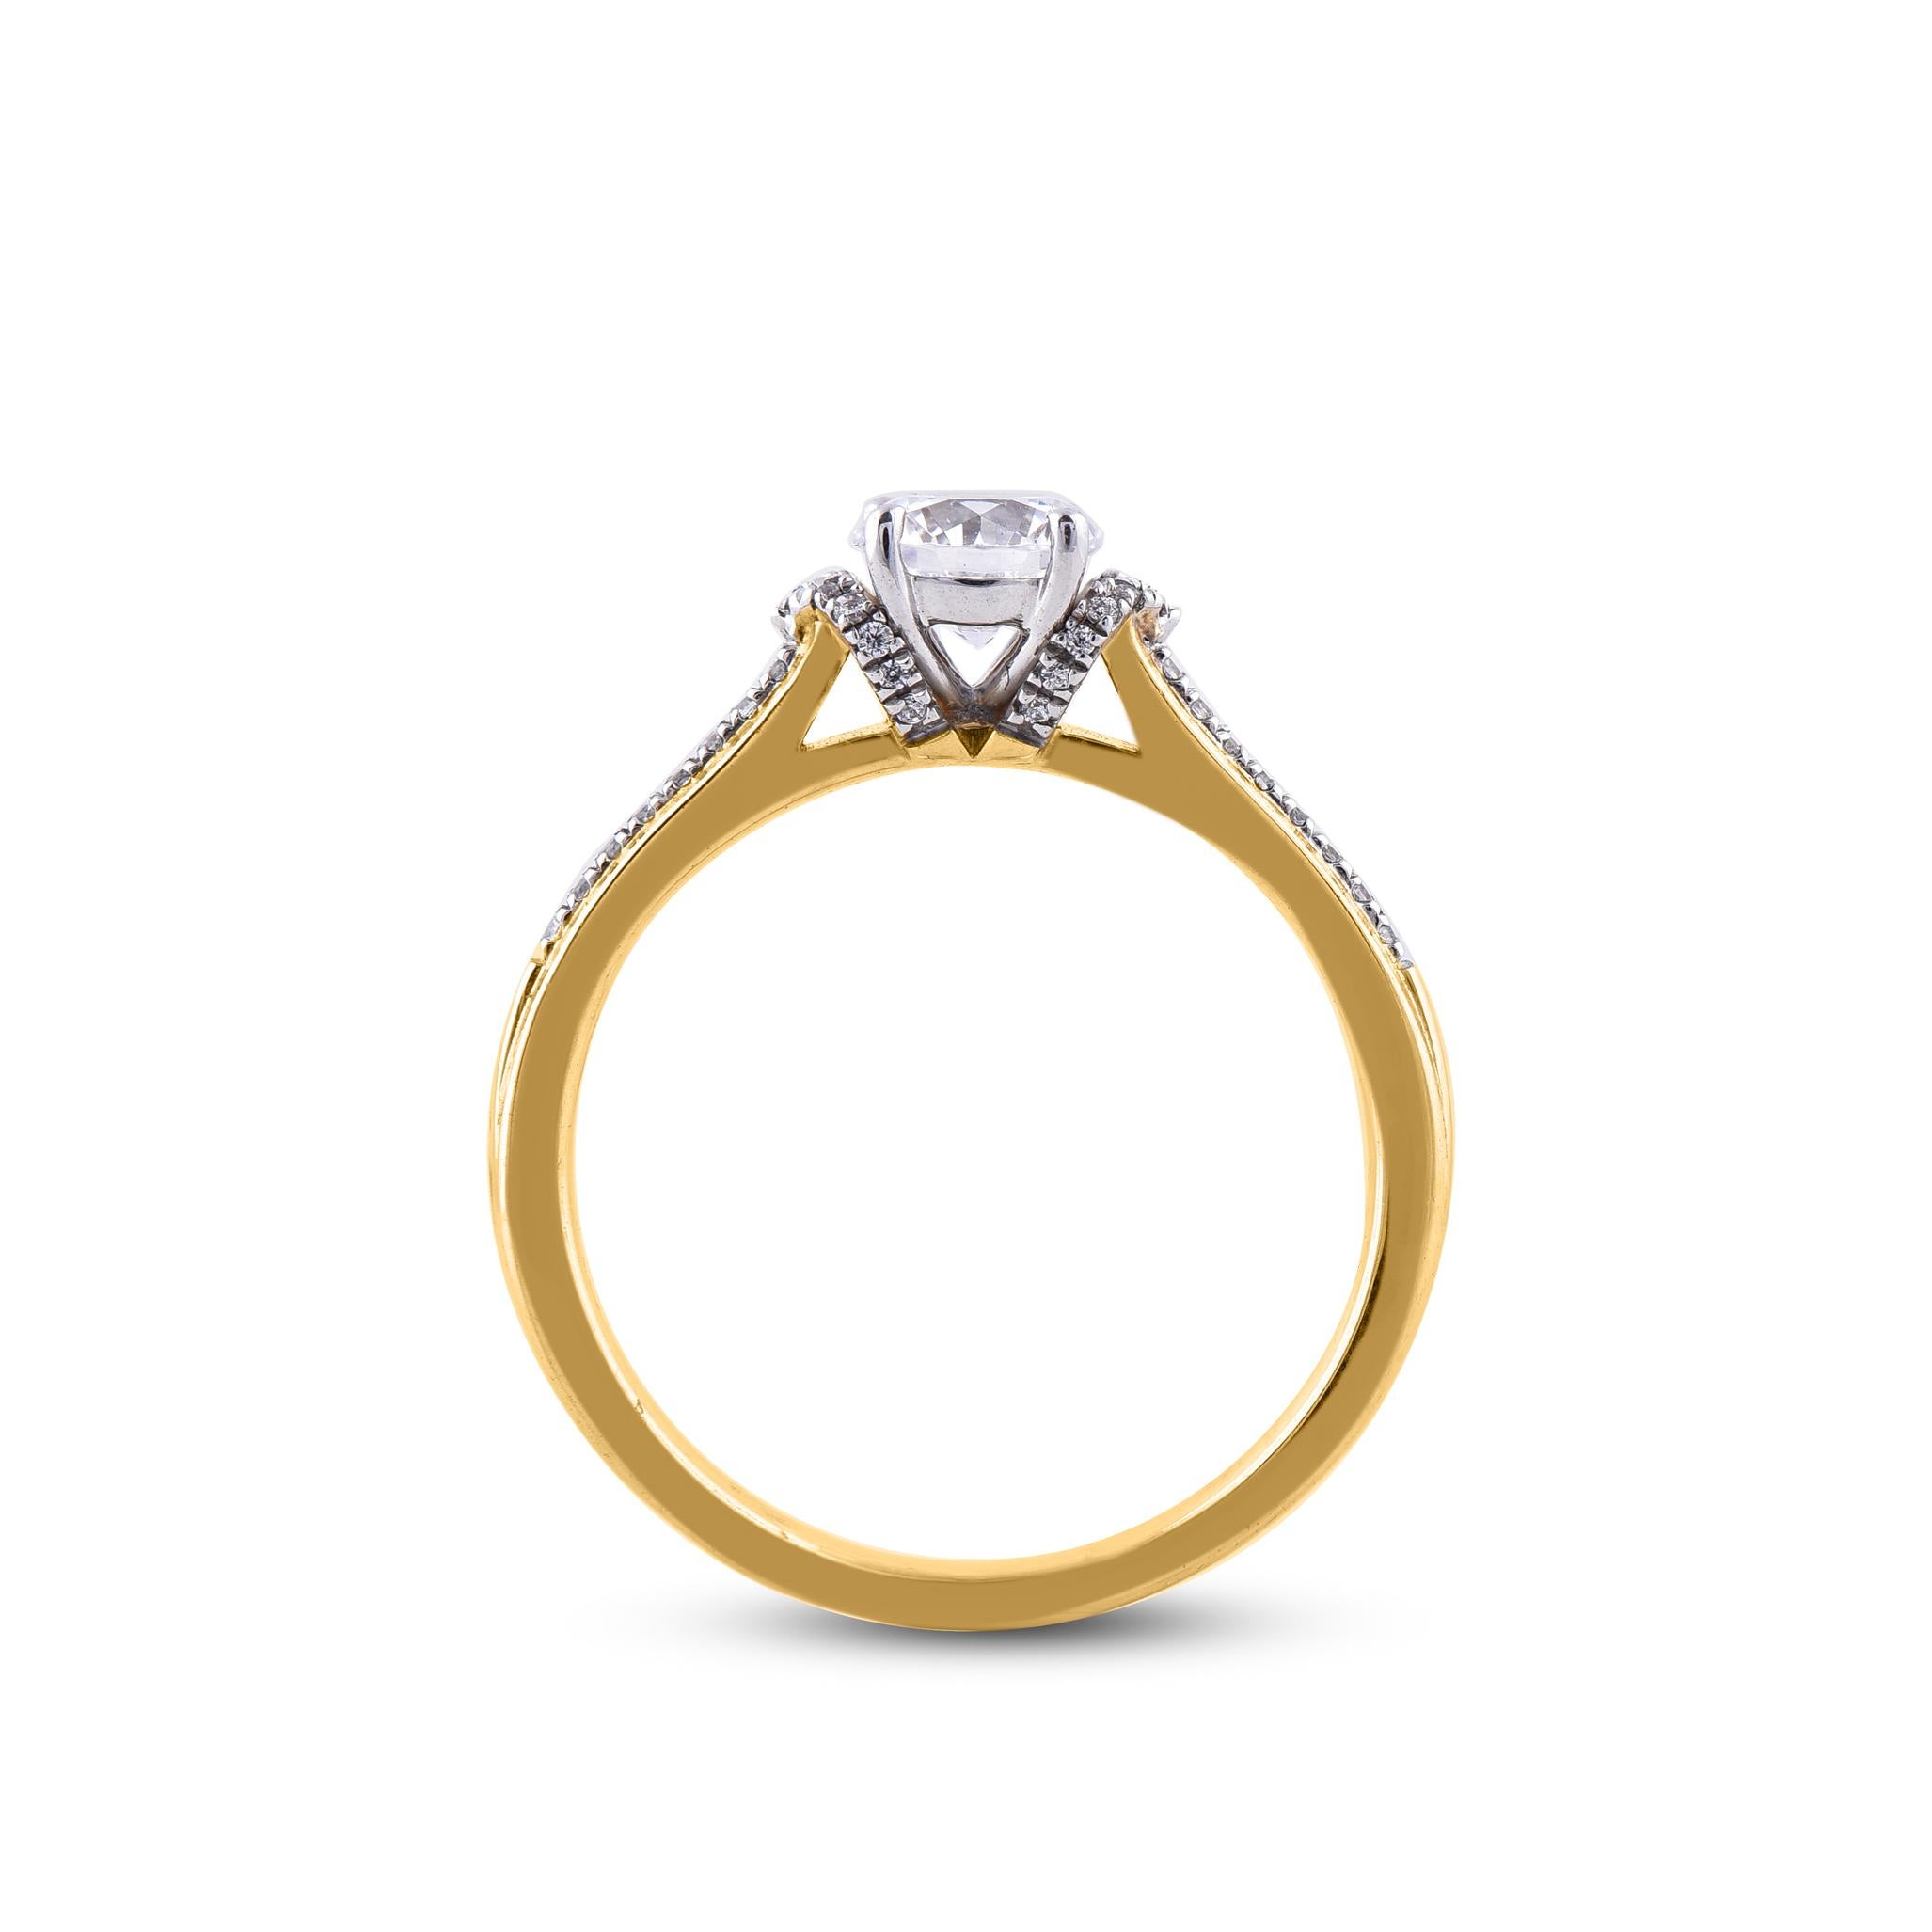 TJD 0.65 Carat Round Natural Diamond 18 Karat Yellow Gold Bridal Engagement Ring In New Condition For Sale In New York, NY